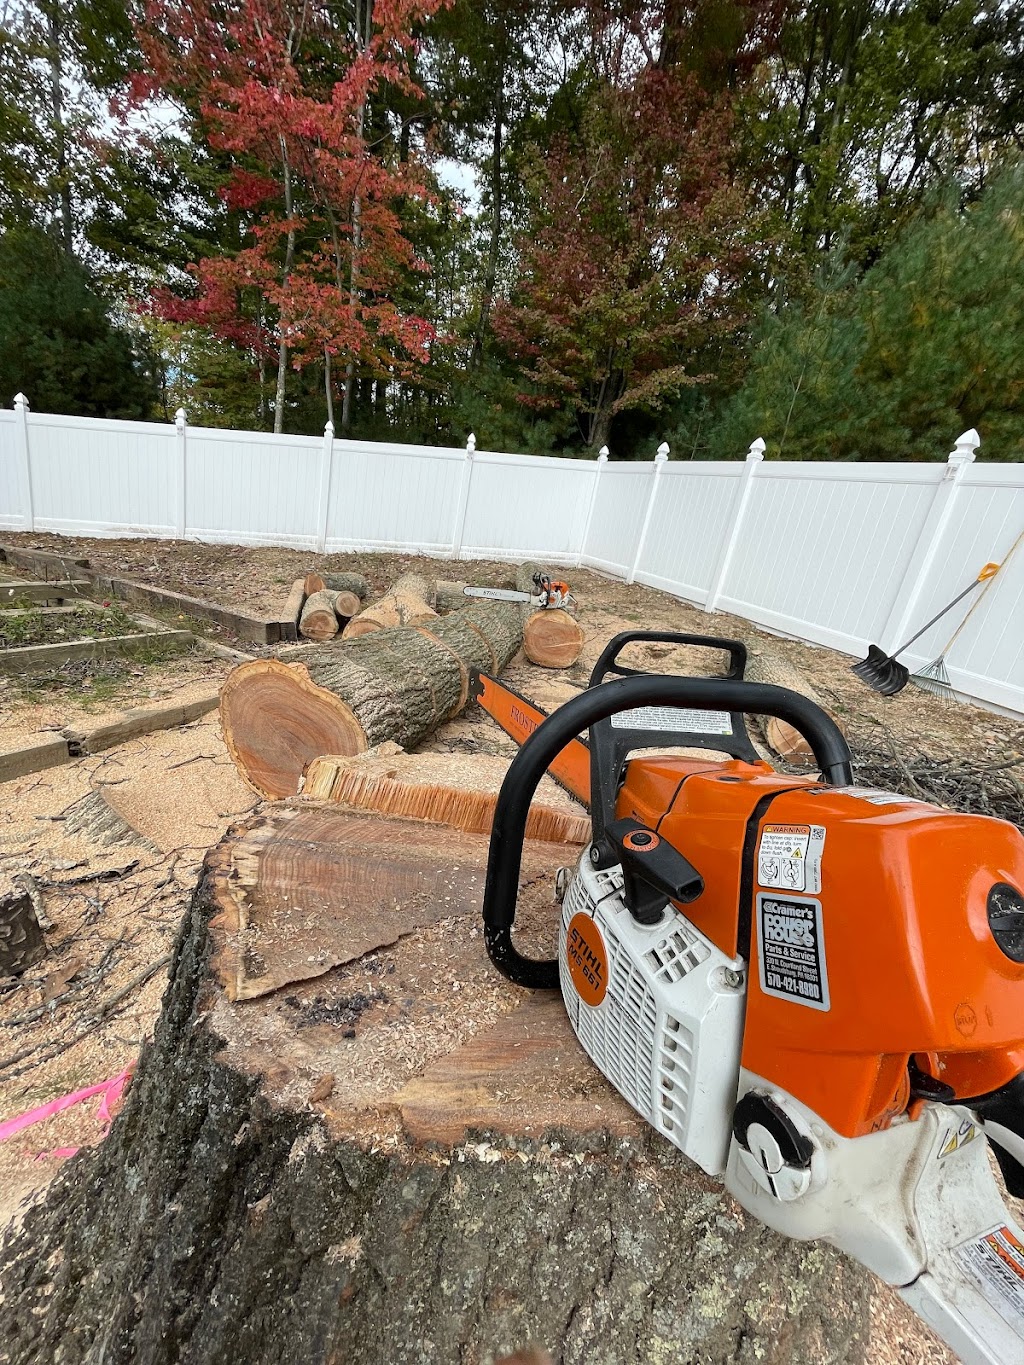 "I was impressed with the exceptional service provided by Earth Lumber Co. 